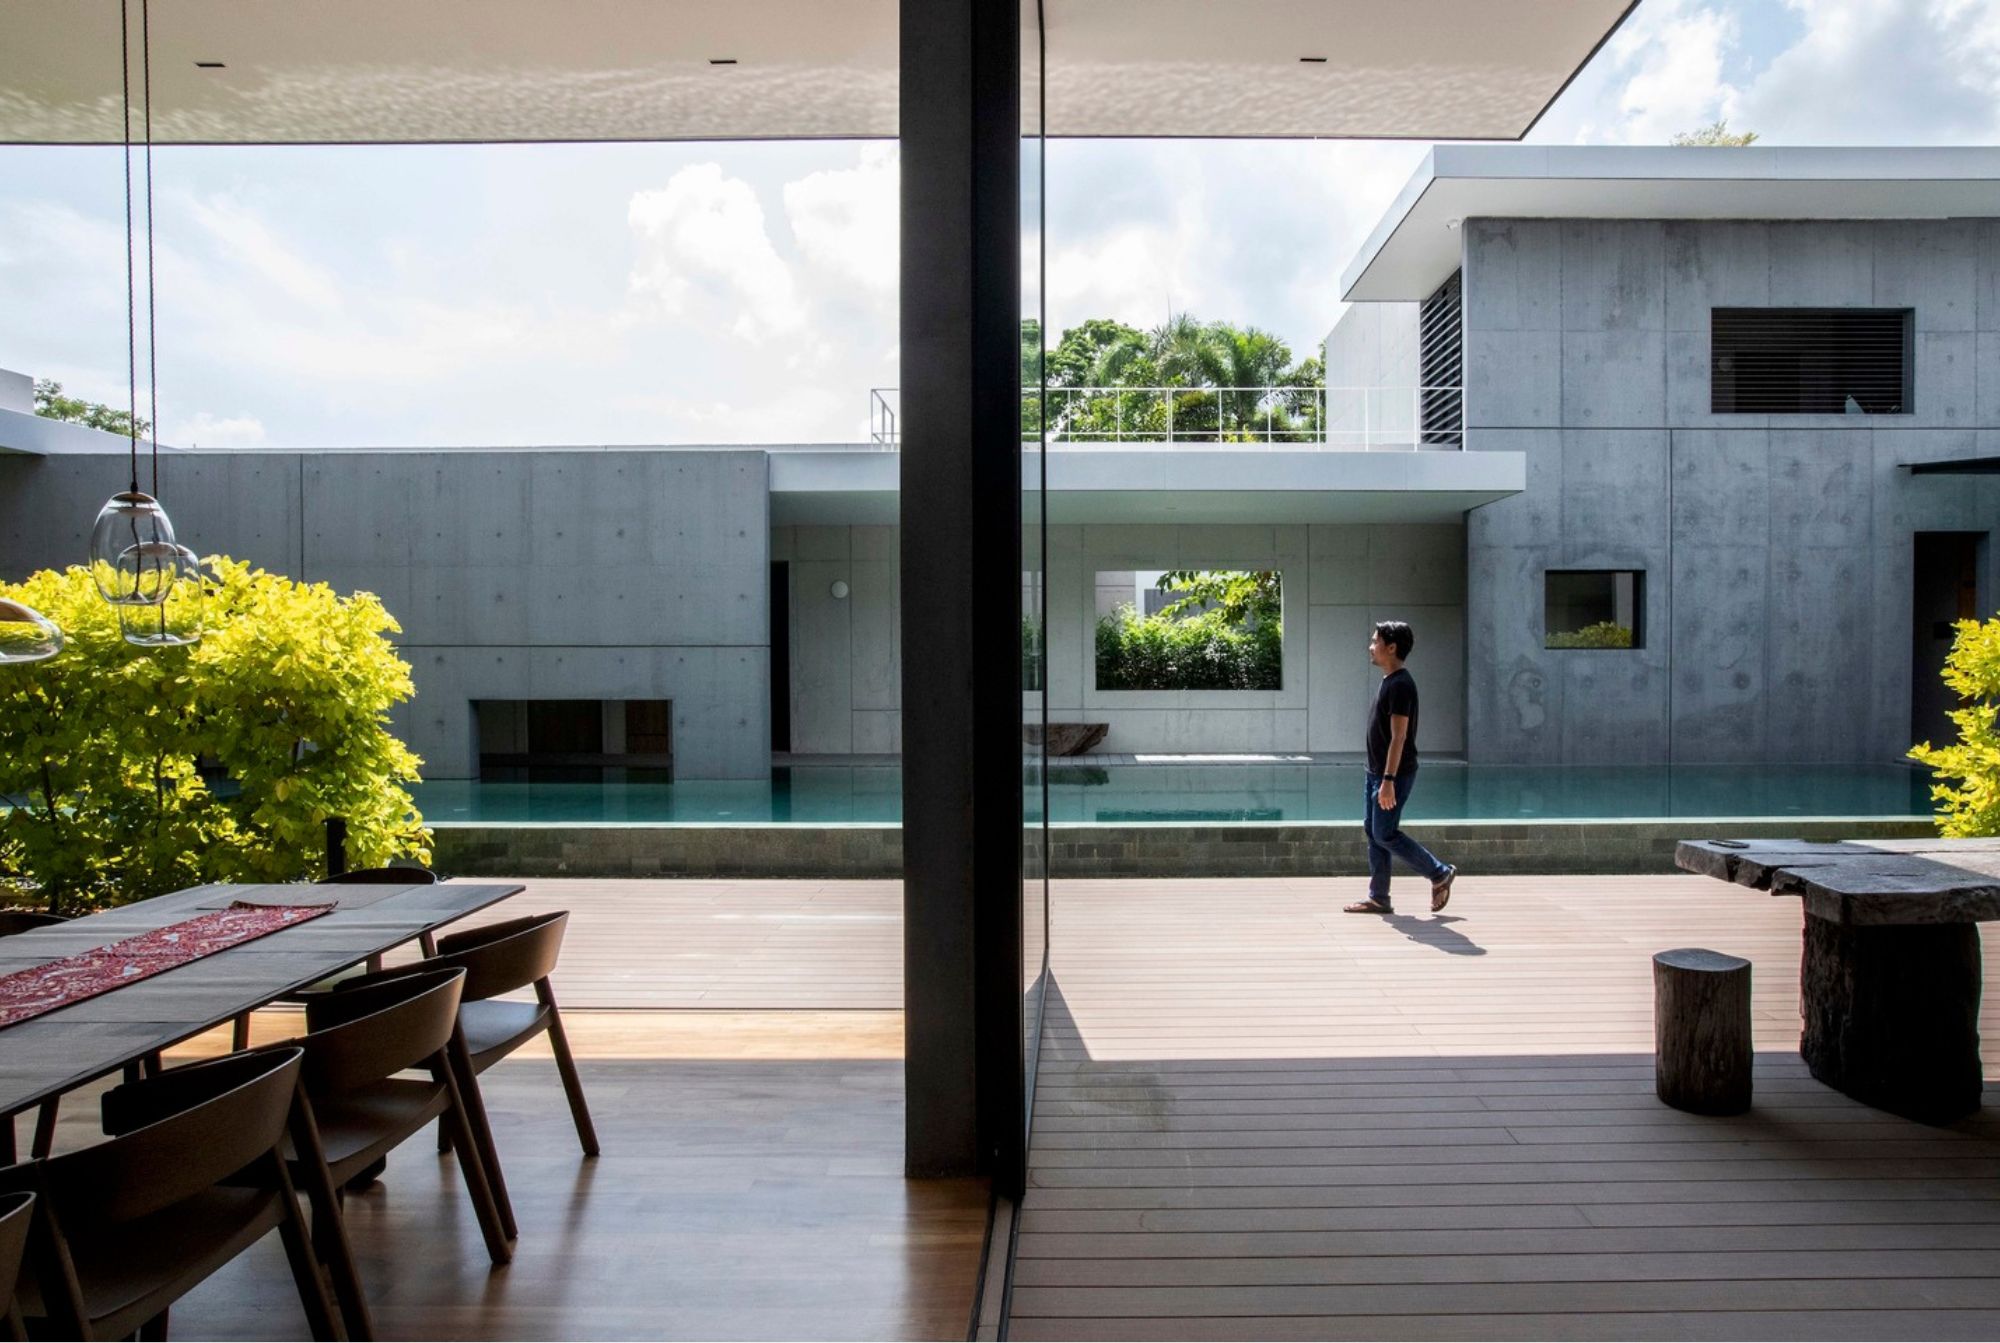 The living room and swimming pool area of the Borderless House. Photo by Ameen Deen.